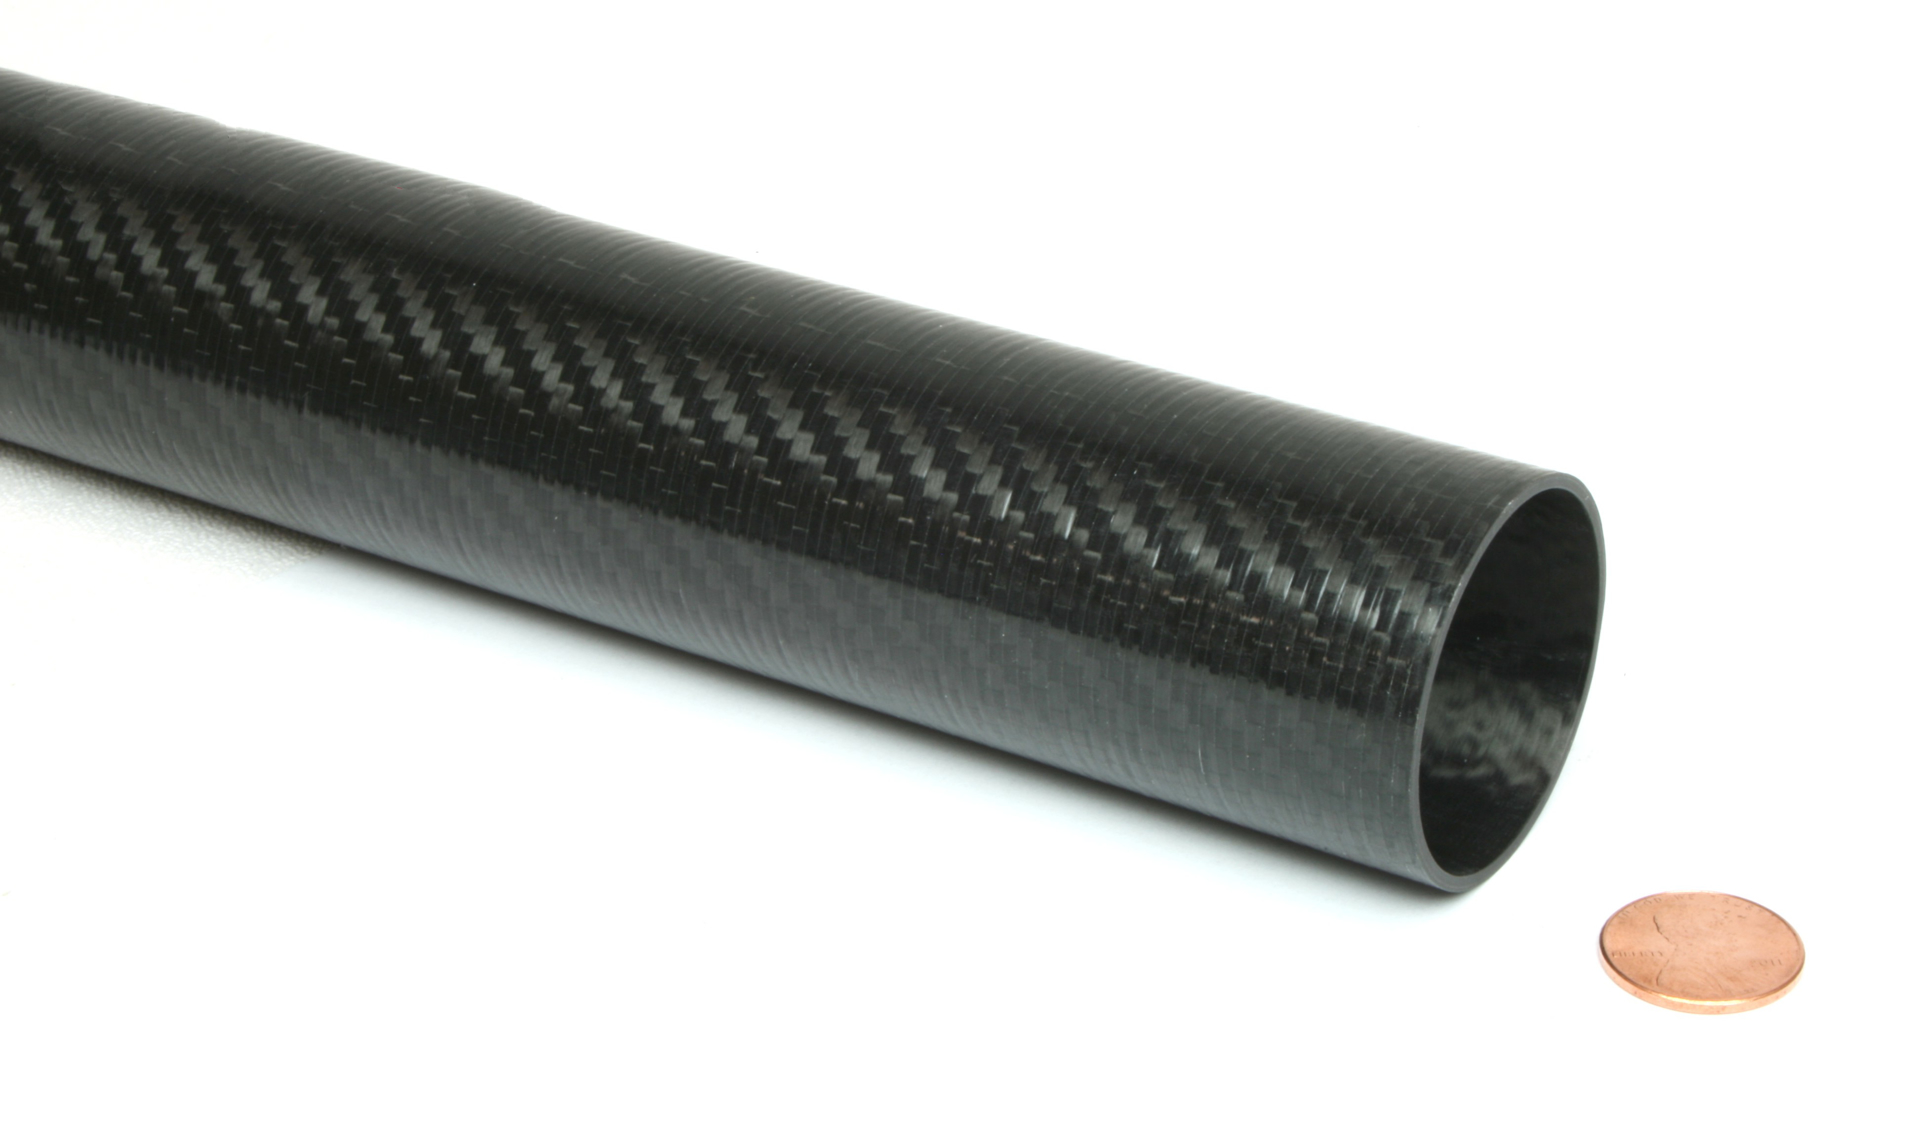 CARBONMAKE 18mmx16mmx500mm Roll Wrapped 100% 3K Carbon Fiber Tube Glossy Surface 2PCS